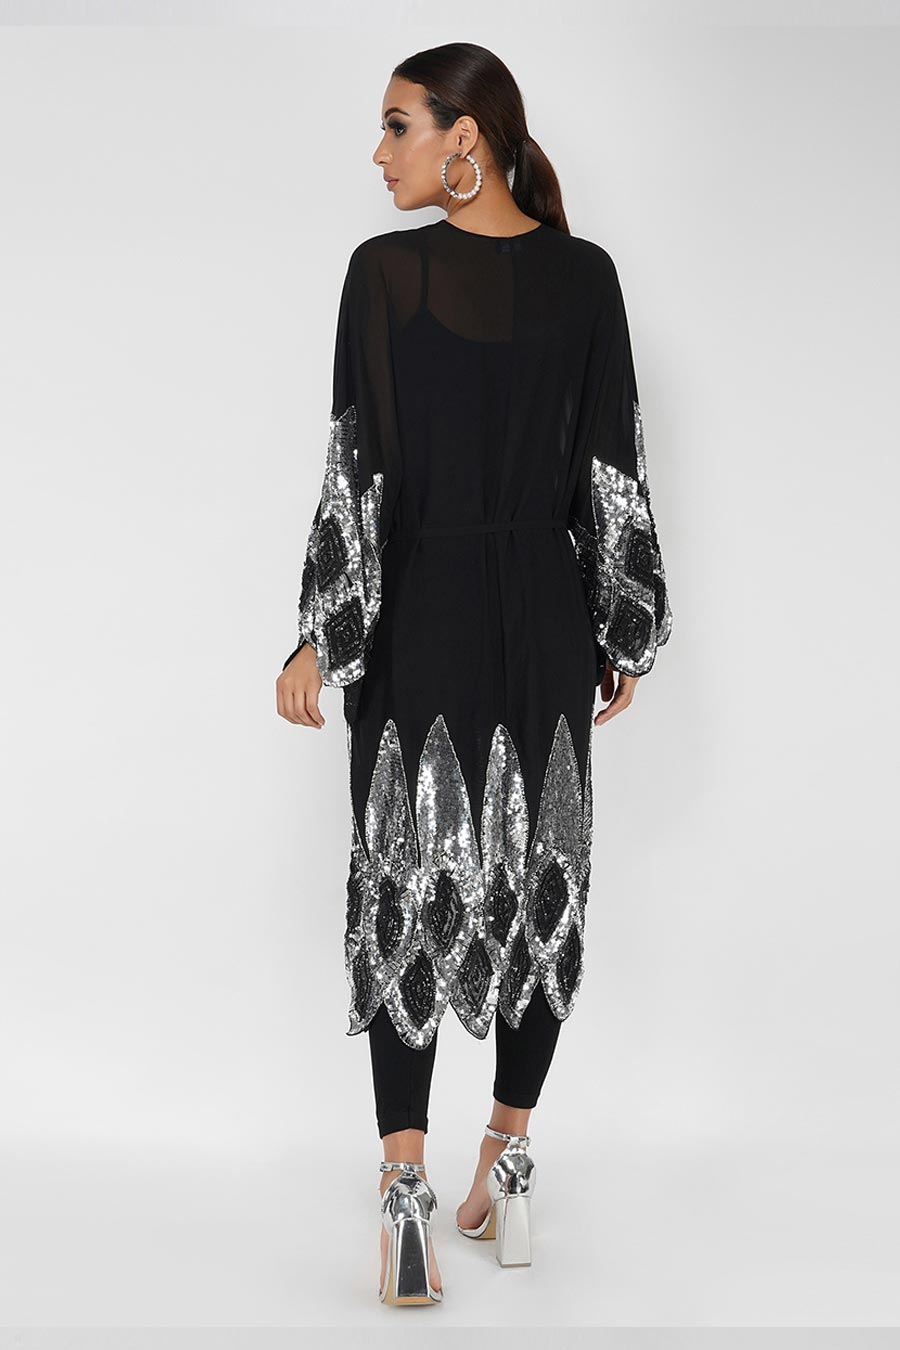 Silver Sequin Embroidered Long Shrug